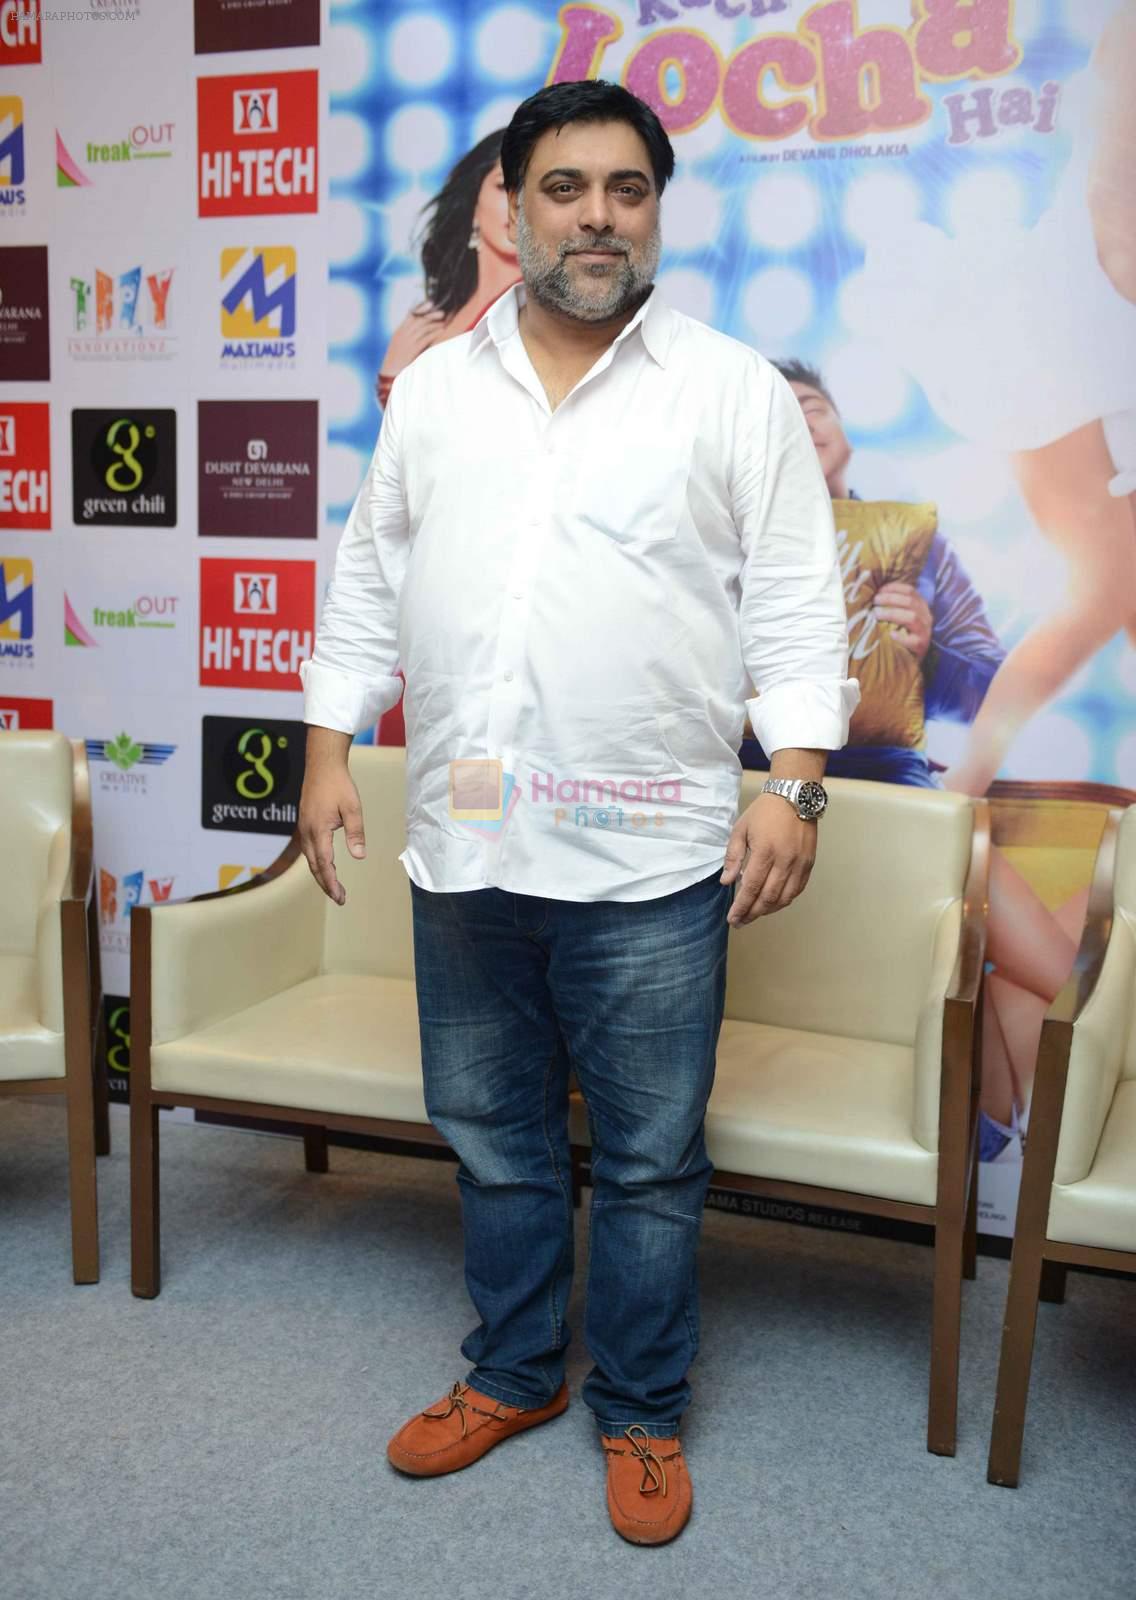 Ram Kapoor in Delhi for film promotions of Kuch Kuch Locha Hai on 4th May 2015